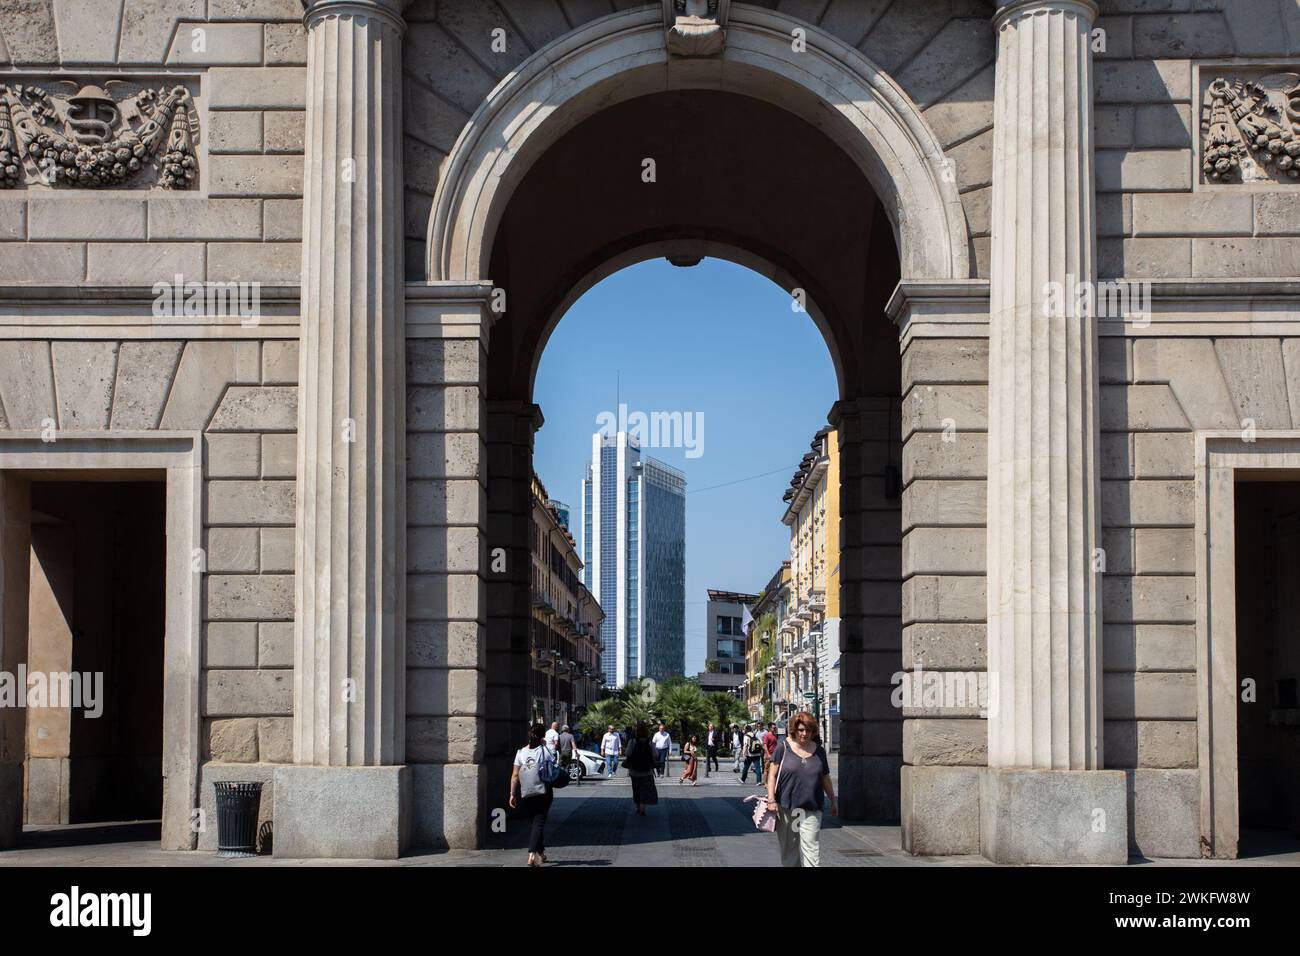 Garibaldi Door is one of the historic entrance to the city of Milan. It leads to Corso Como a pedestrian street with restaurants and shops. Stock Photo